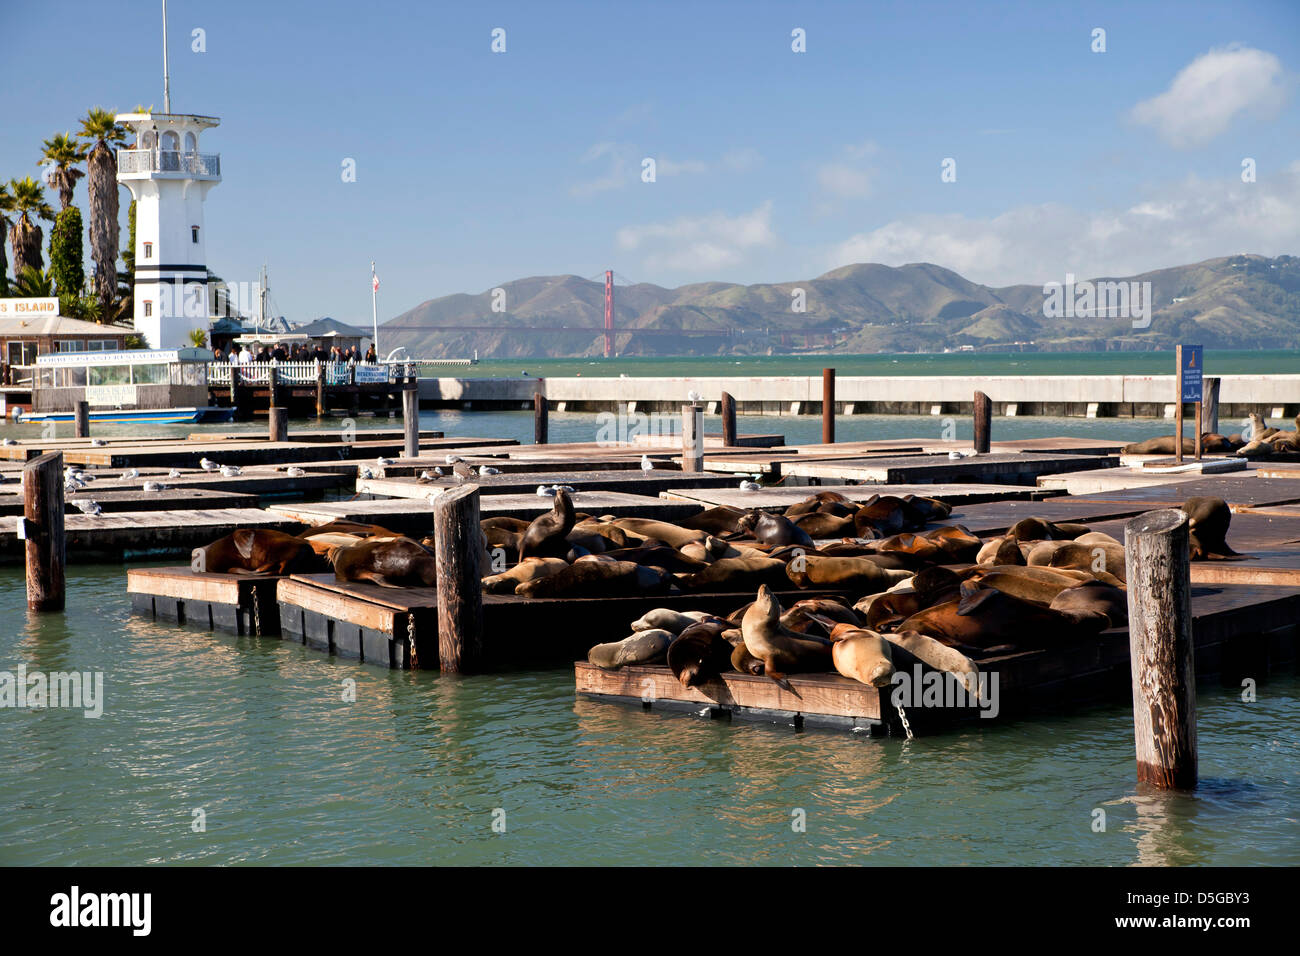 The sea lions at Pier 39 of Fishermans Wharf in San Francisco, California, United States of America, USA Stock Photo